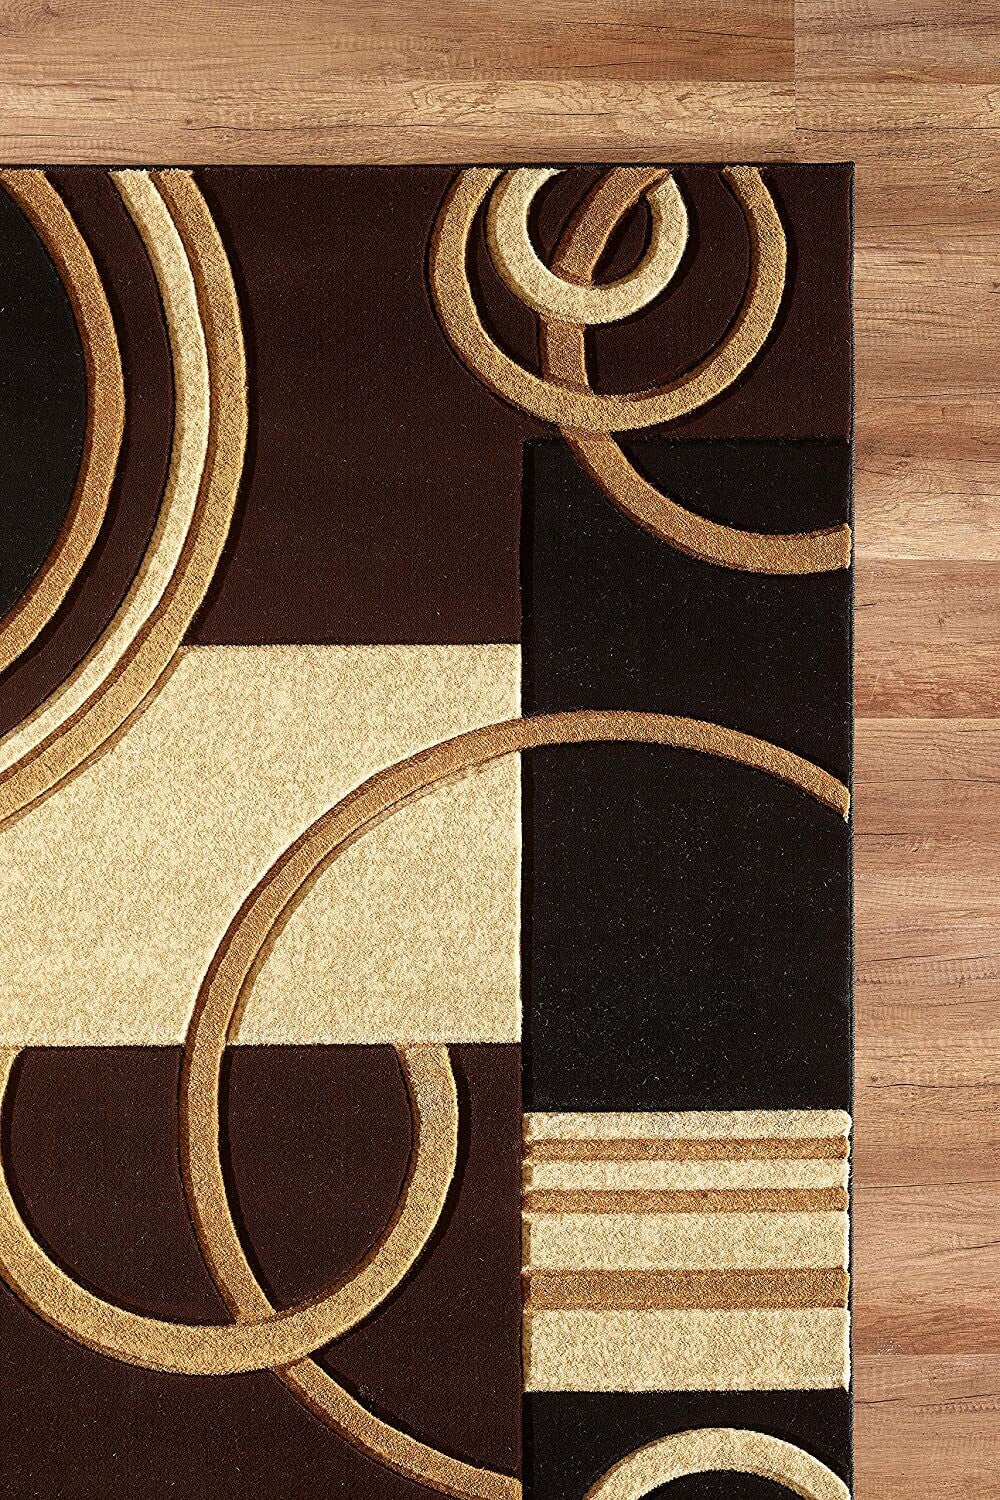 Platinum Collection Swirls Brown Beige Rug Carpet Living Room Dining Accent (4937)